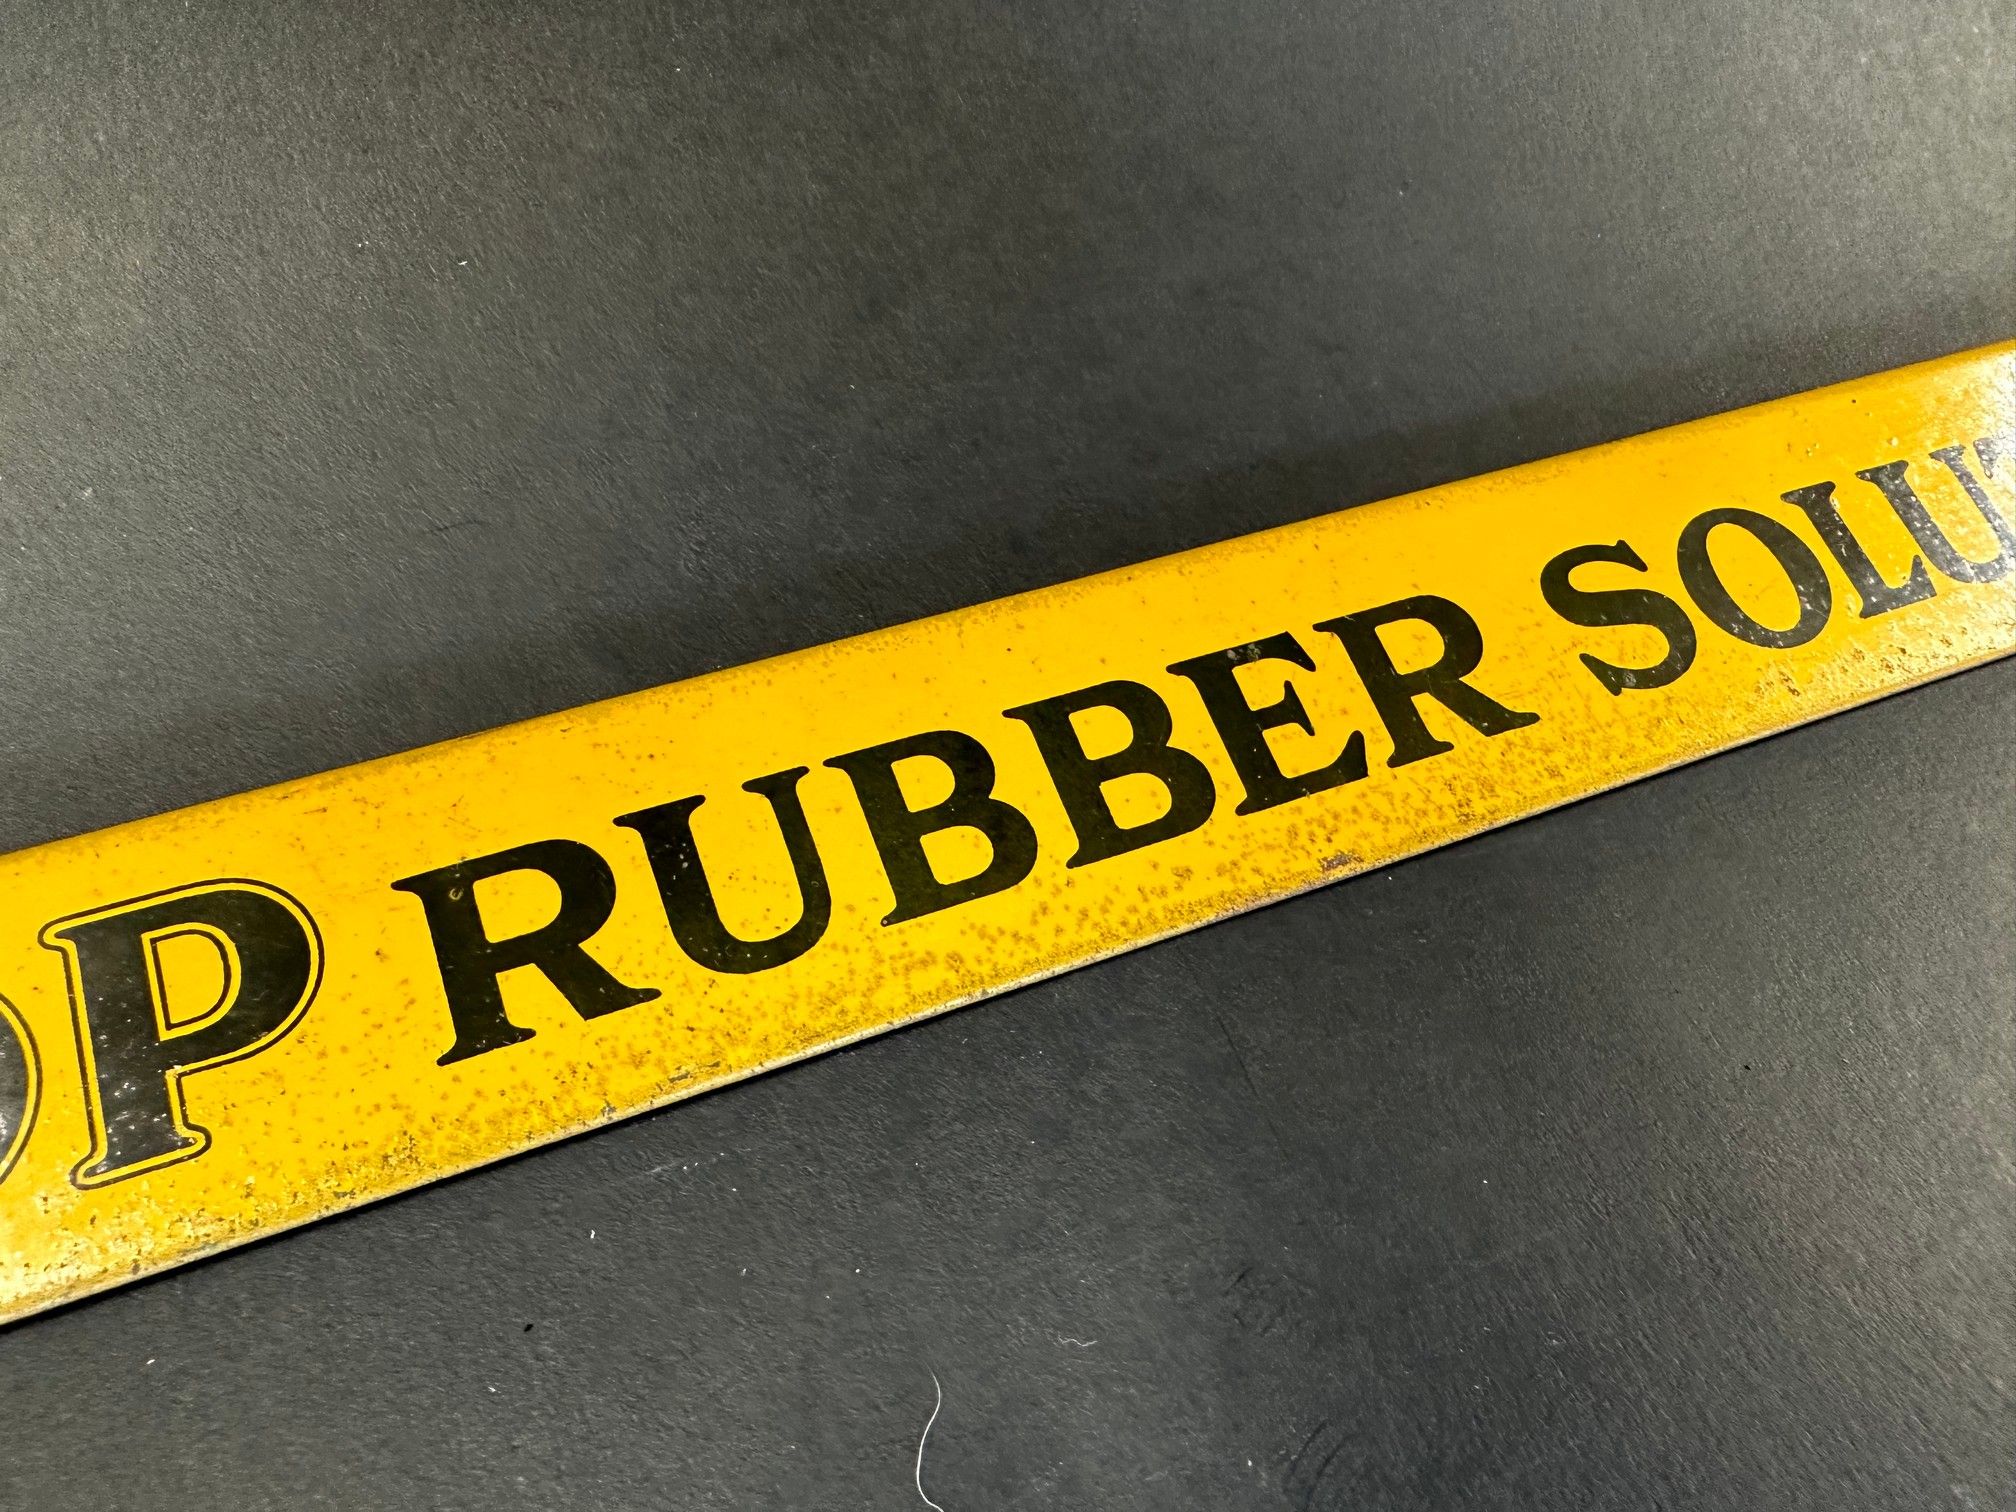 A Dunlop Rubber Solution shelf strip in good condition. - Image 4 of 6